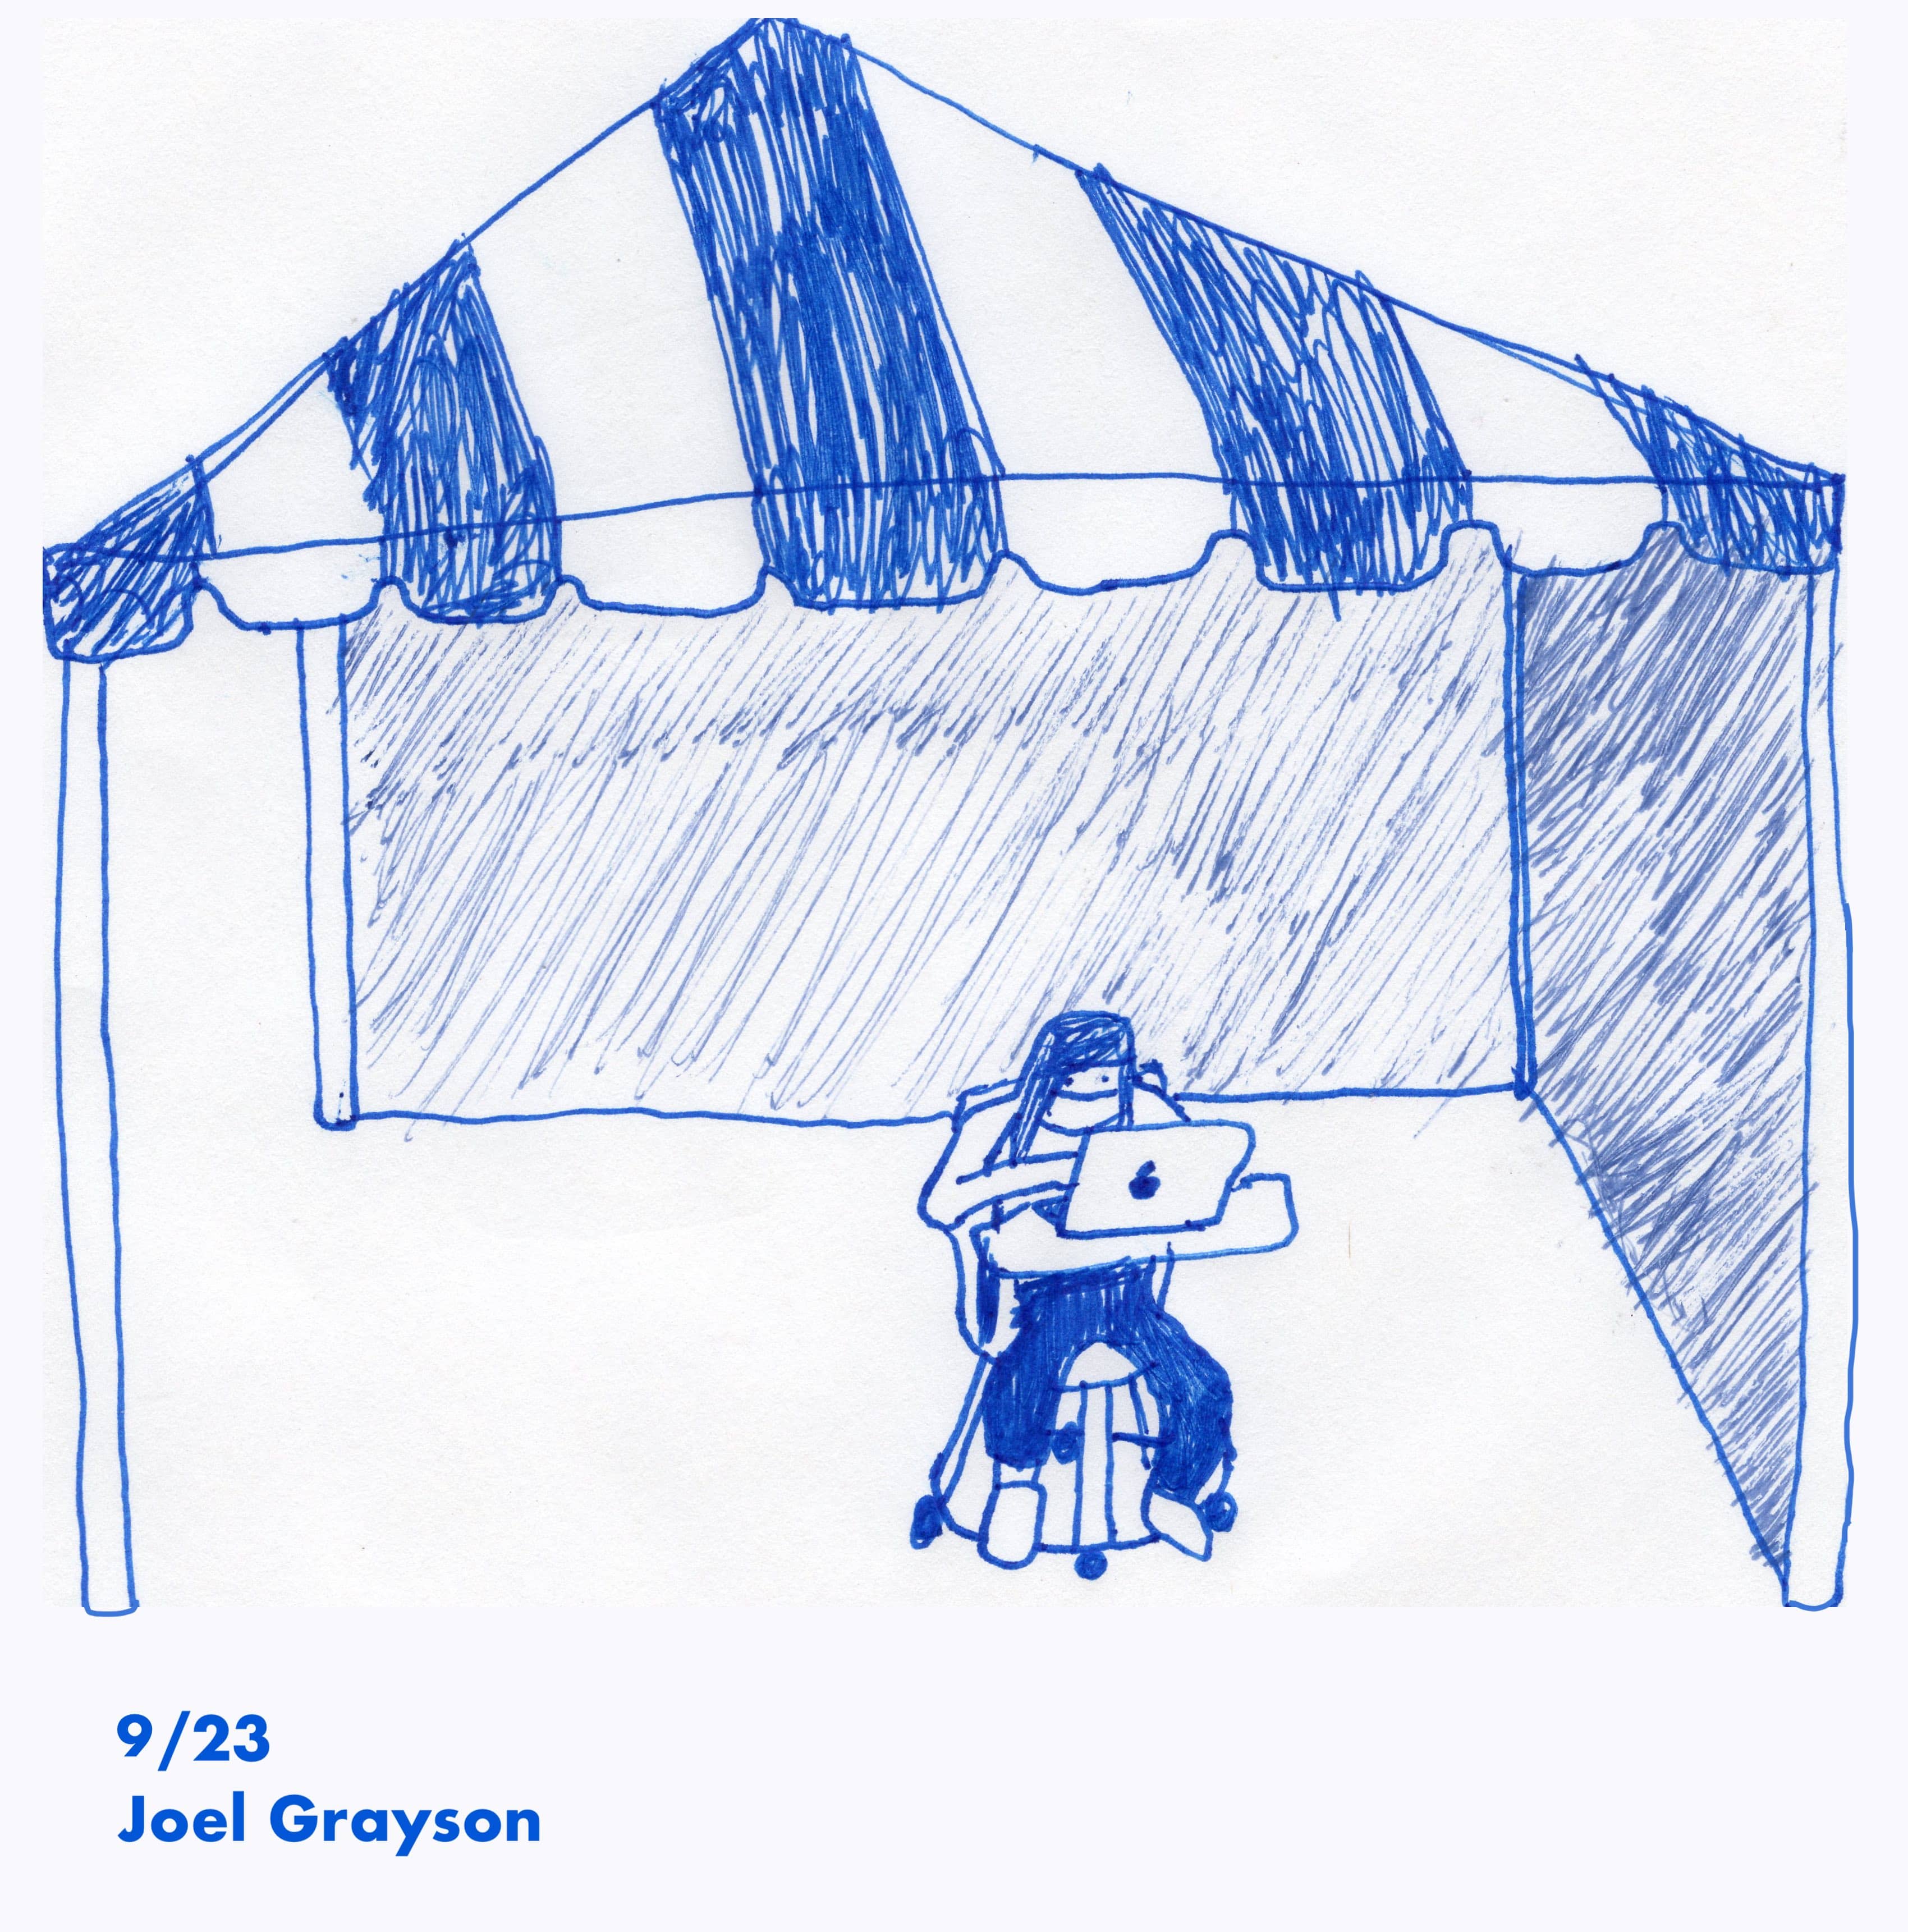 Artwork titled 'Zoom Tent' on 2020.09.23